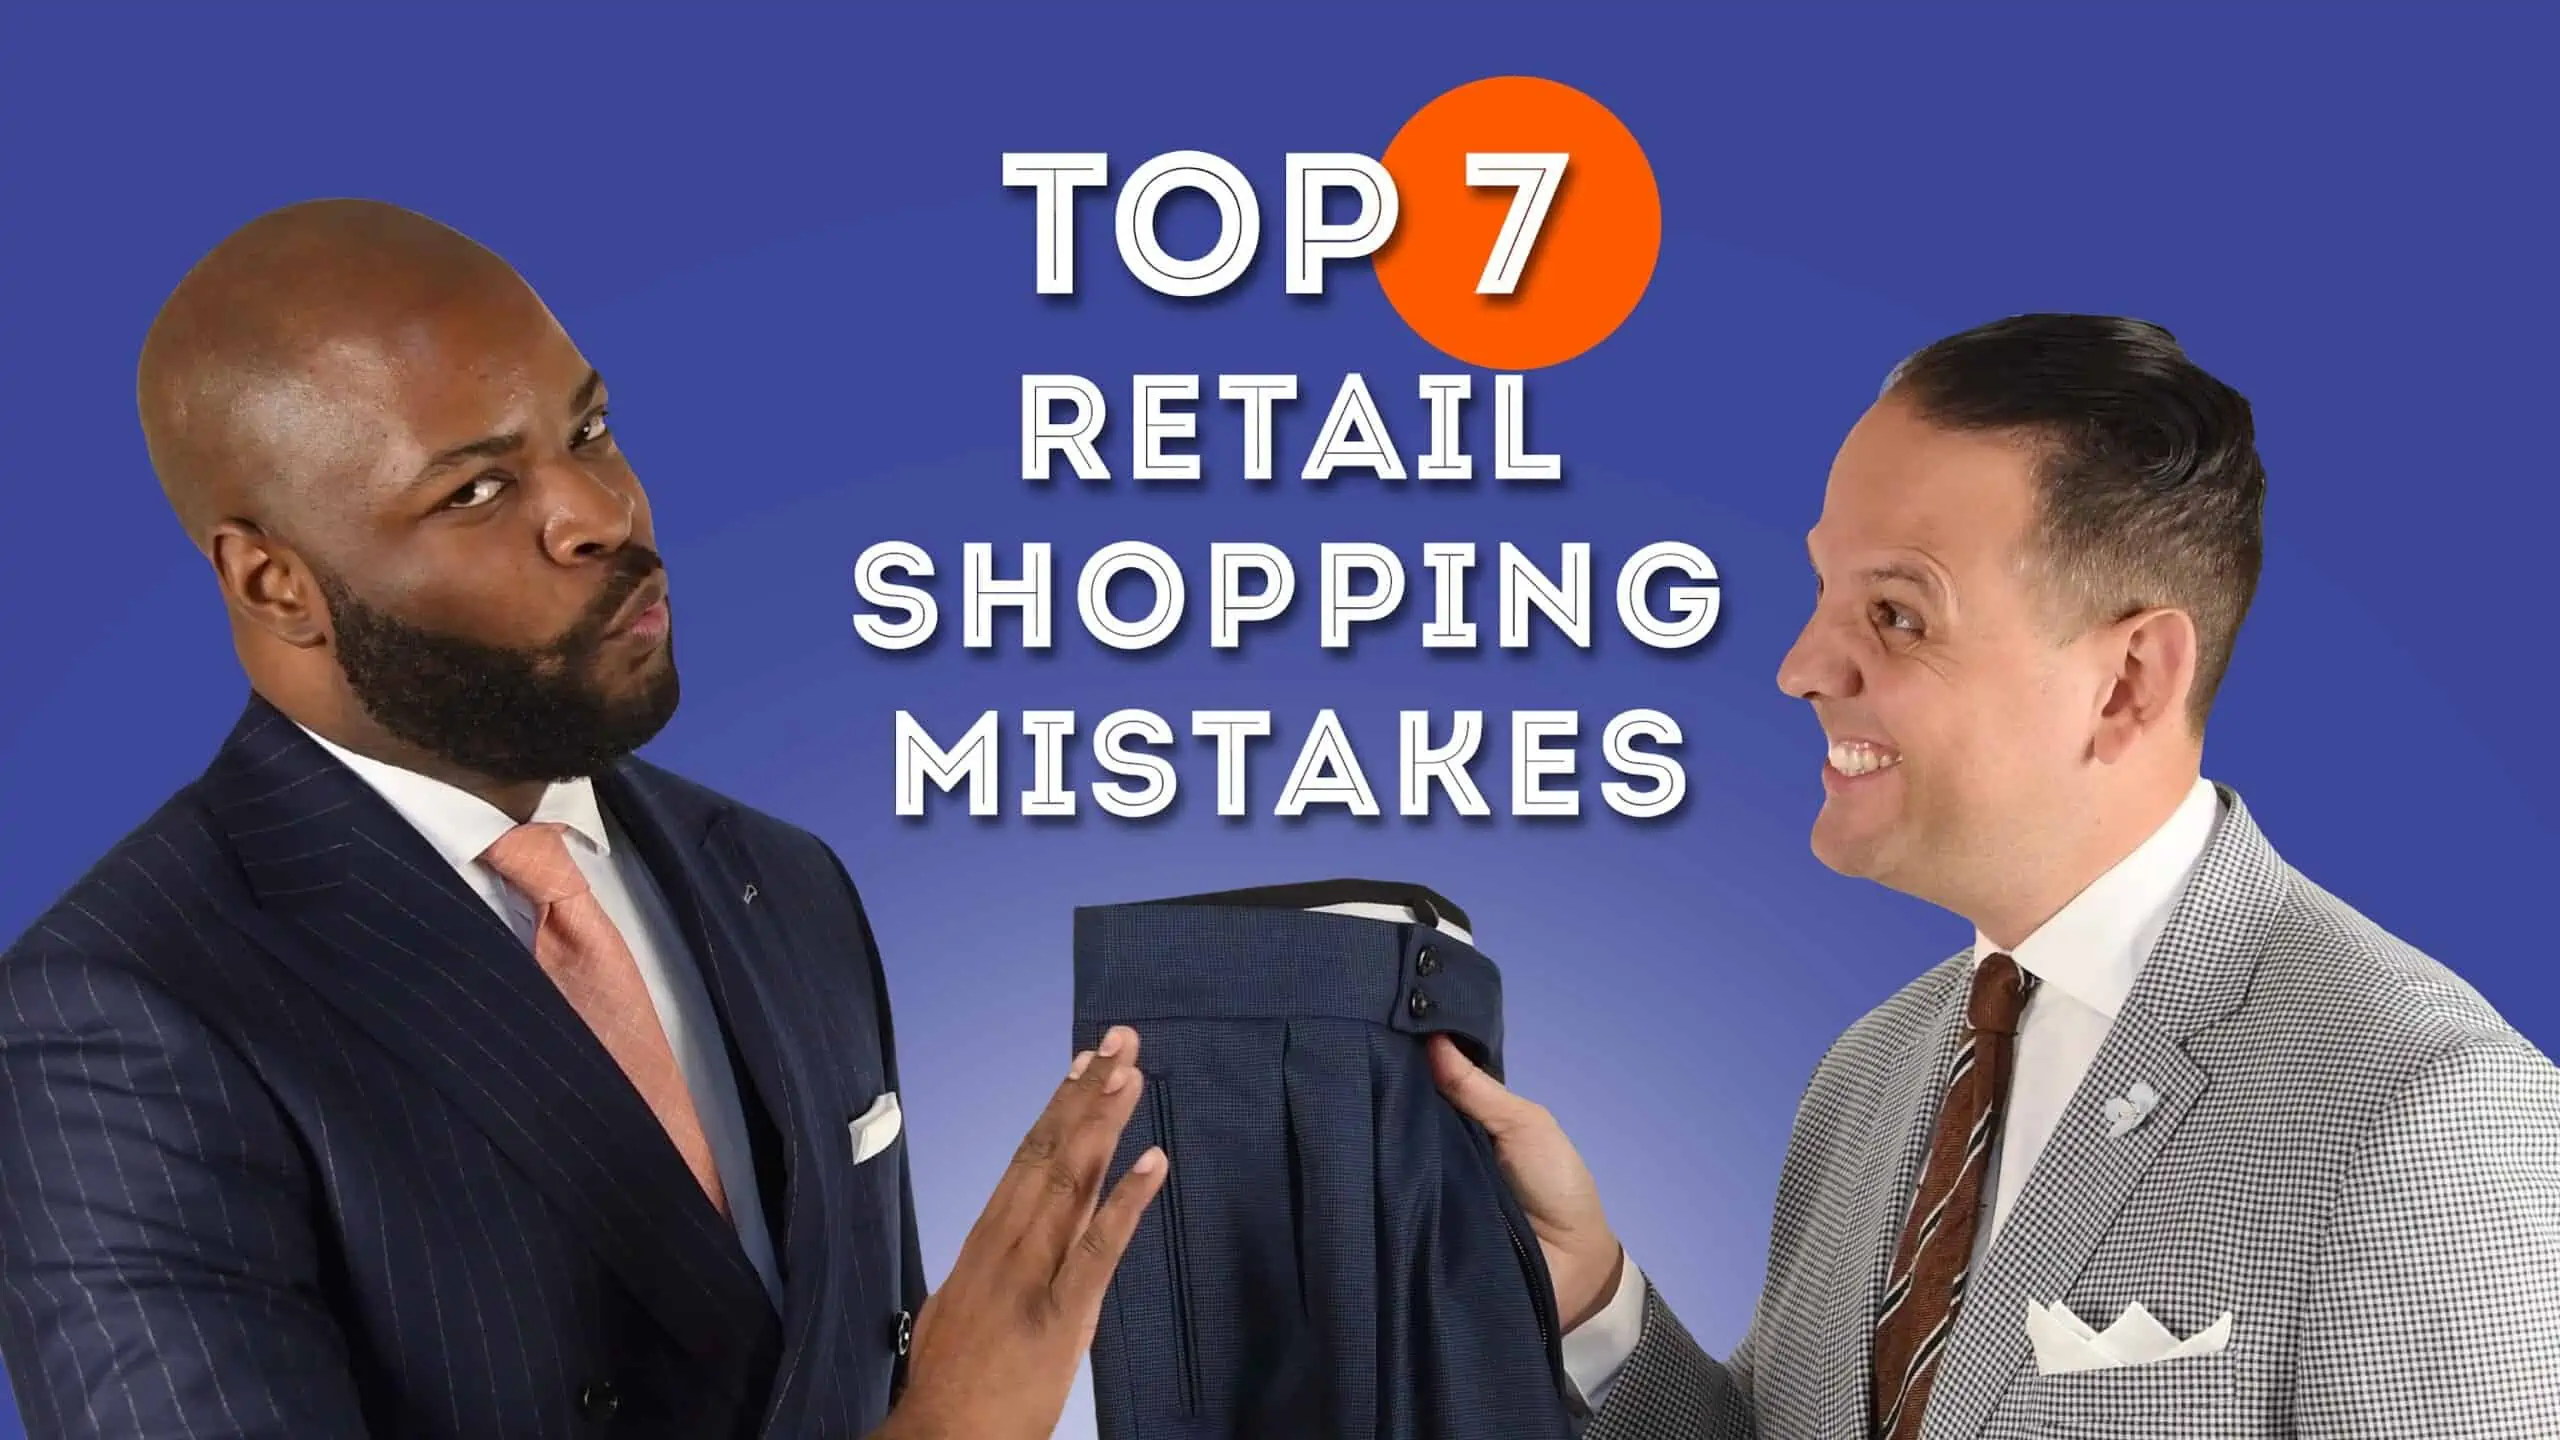 top 7 retail shopping mistakes 3840x2160 scaled